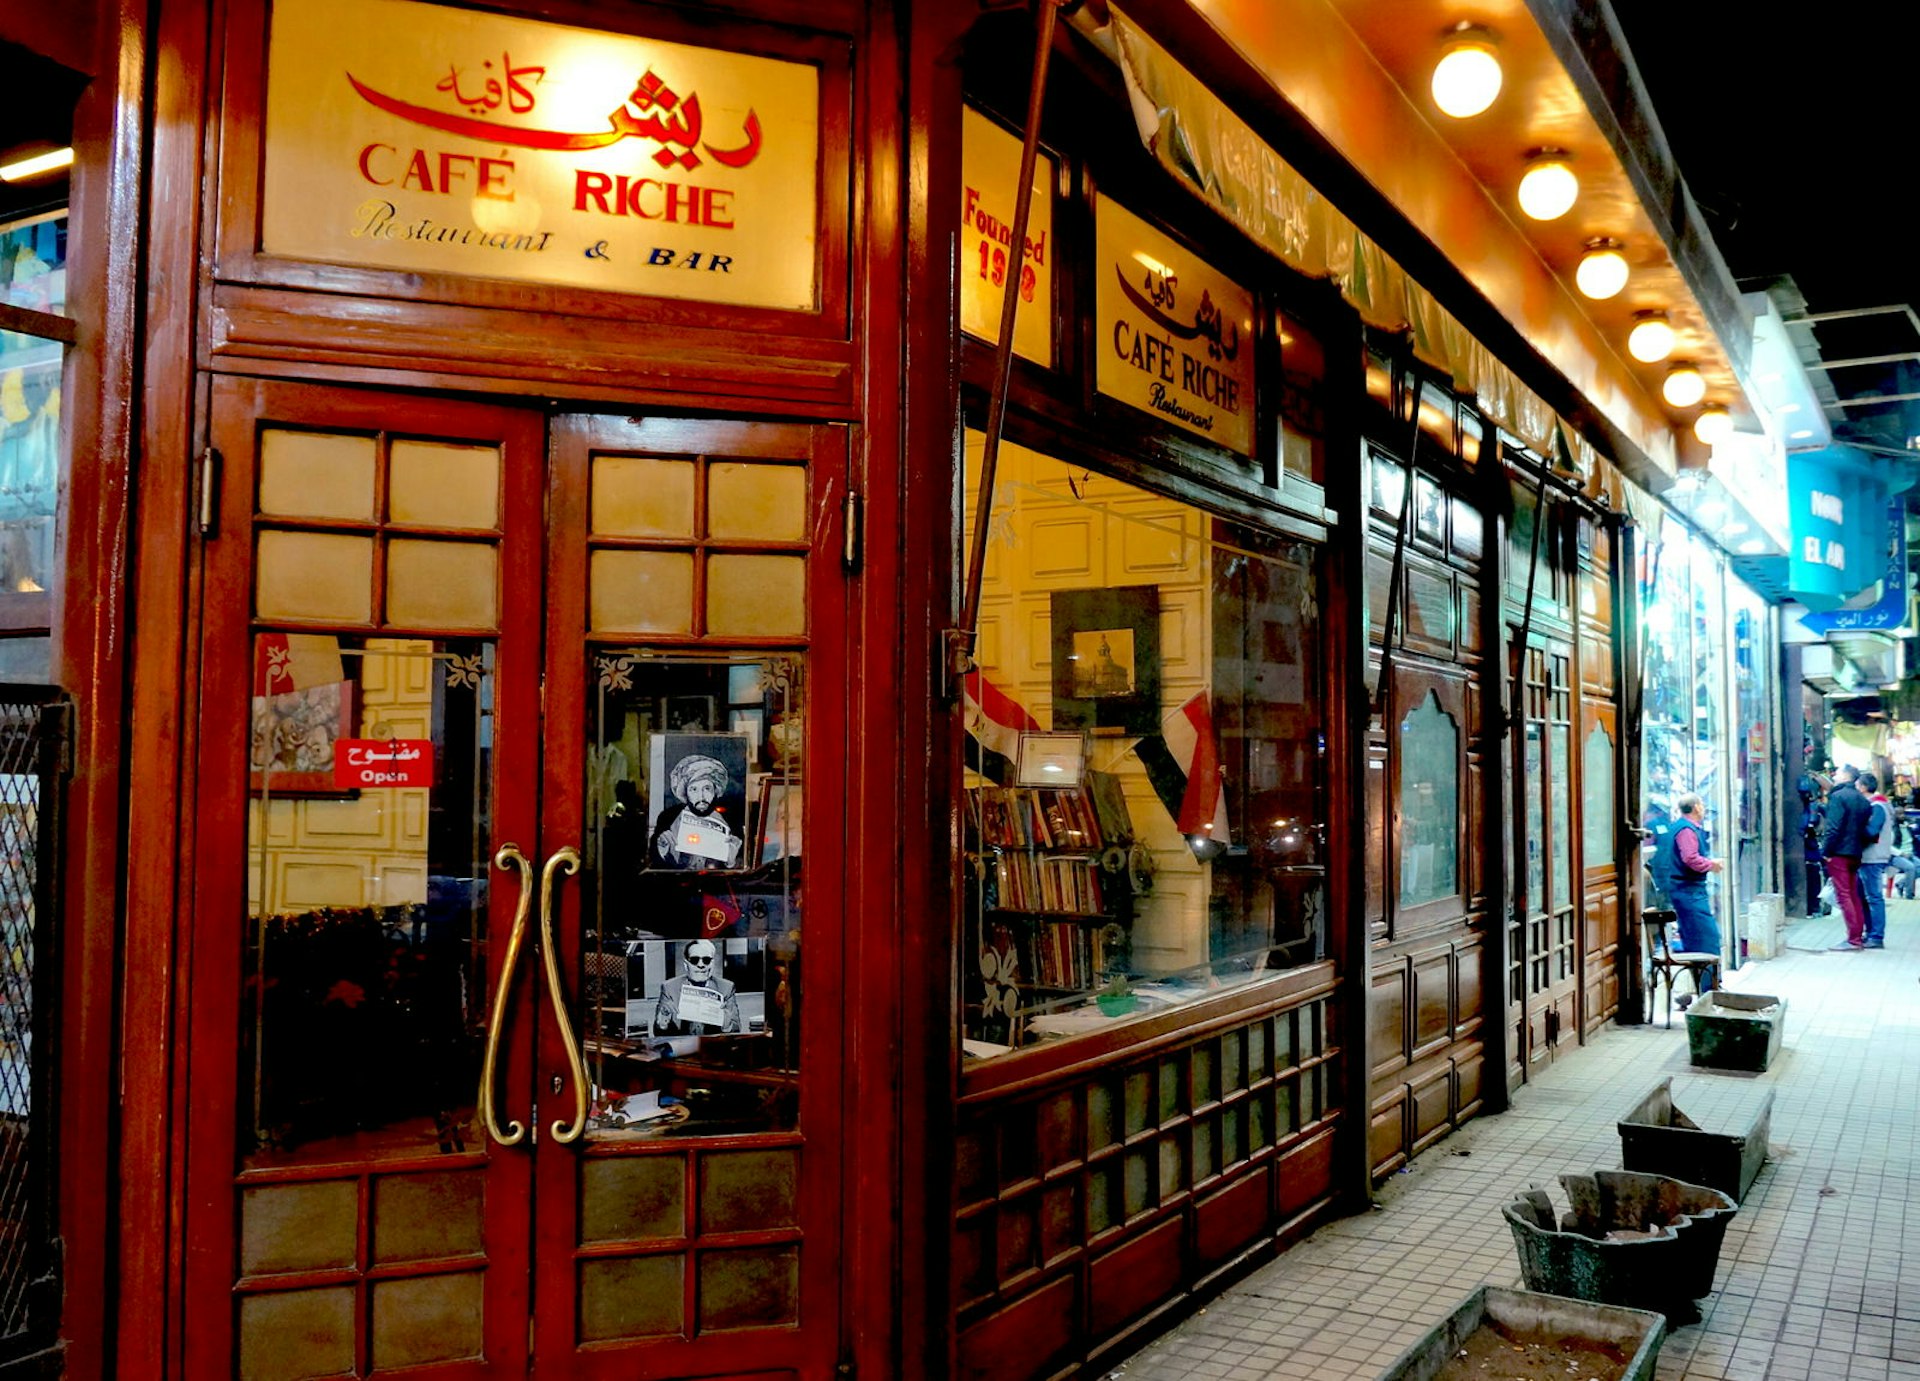 Exterior of Café Riche. Image by Karima Hassan Ragab / Lonely Planet